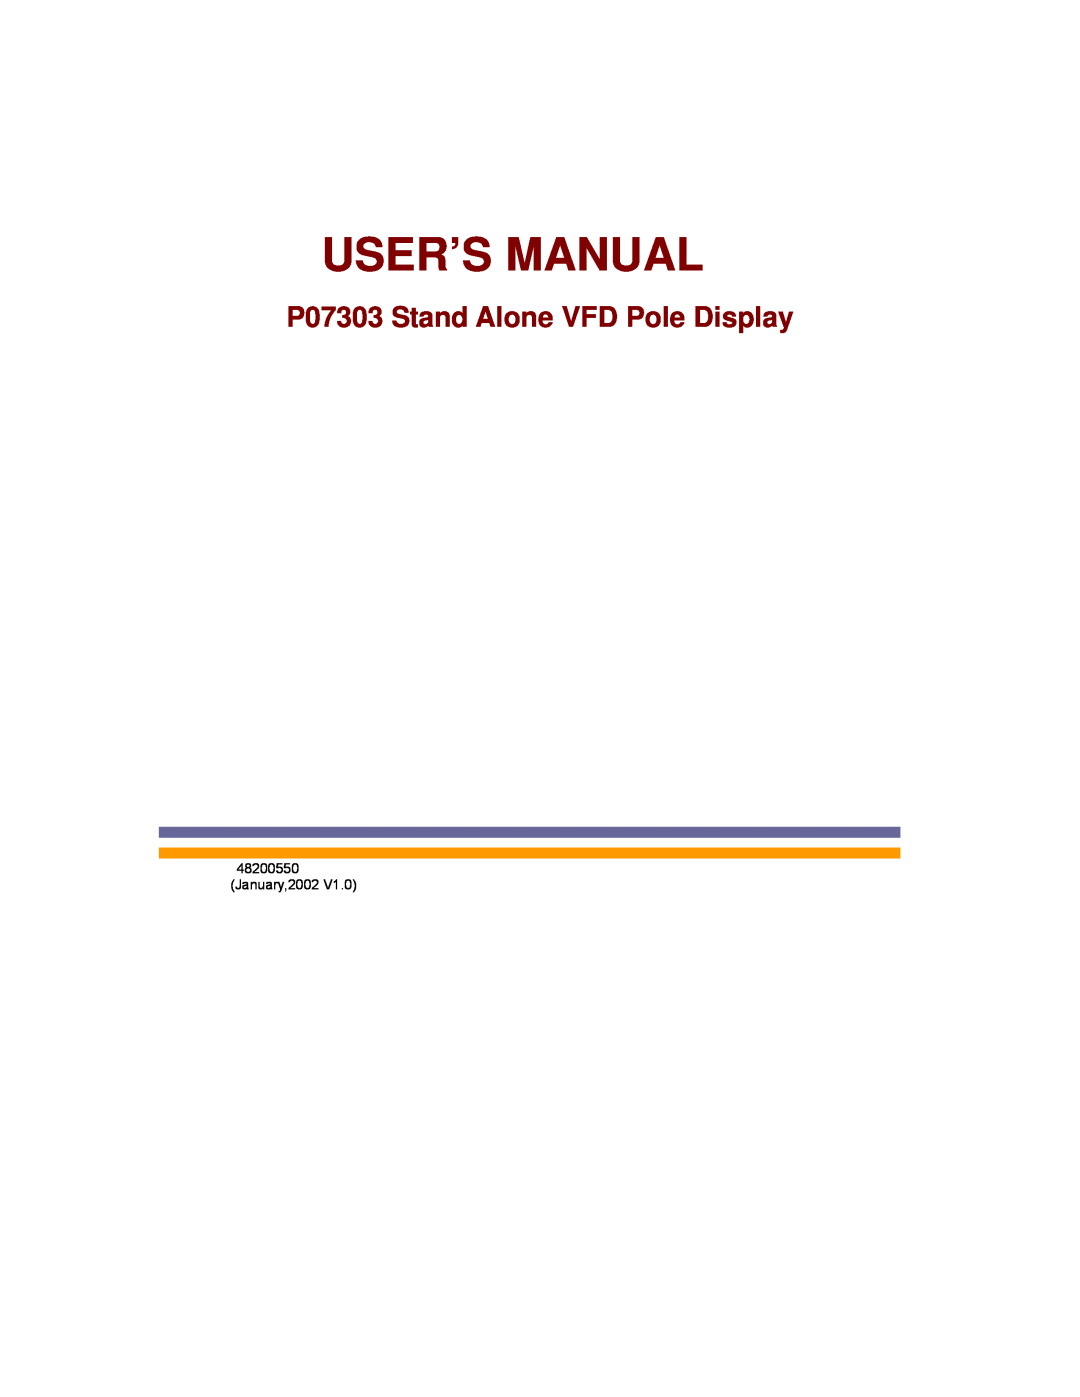 Epson user manual User’S Manual, P07303 Stand Alone VFD Pole Display, January,2002 